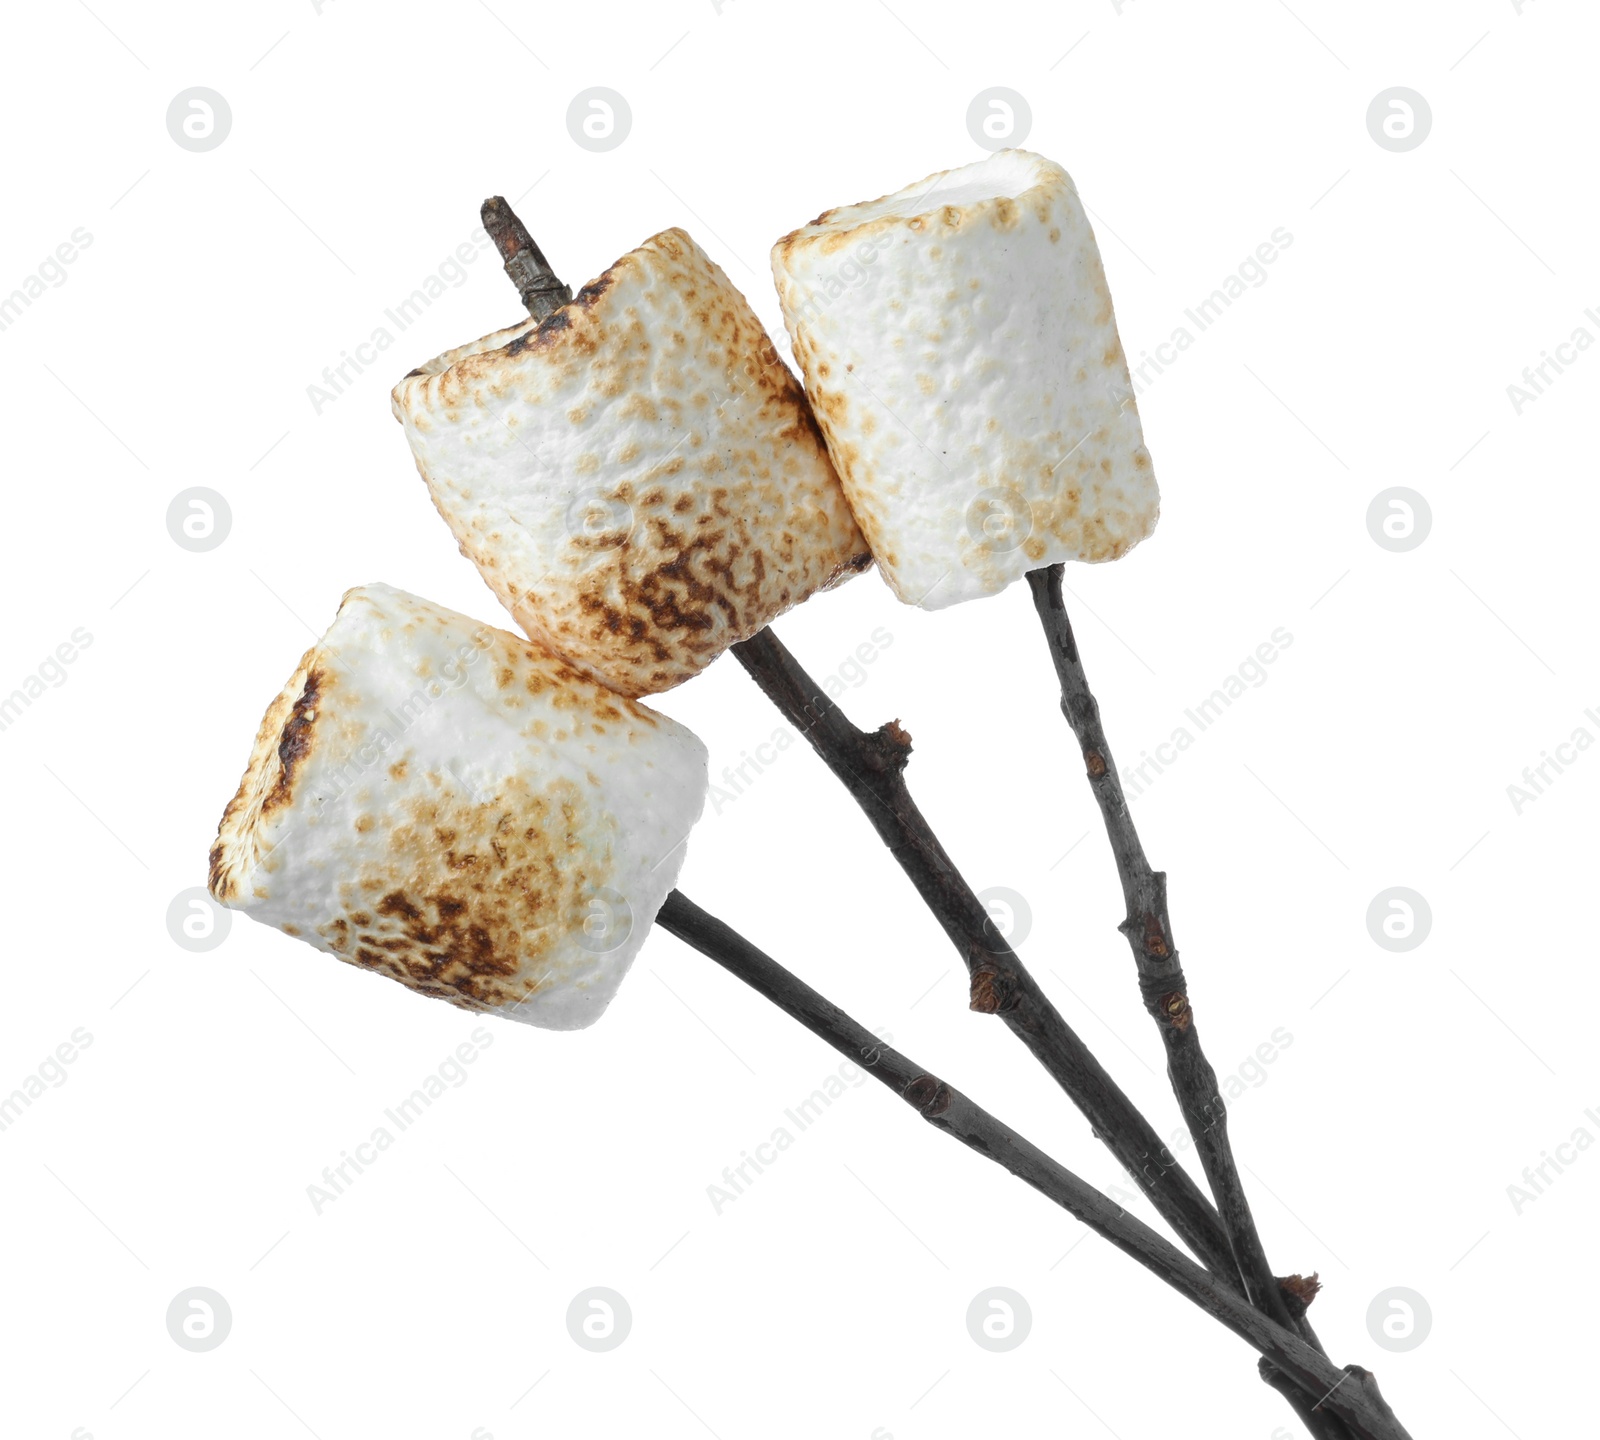 Photo of Twigs with roasted marshmallows on white background